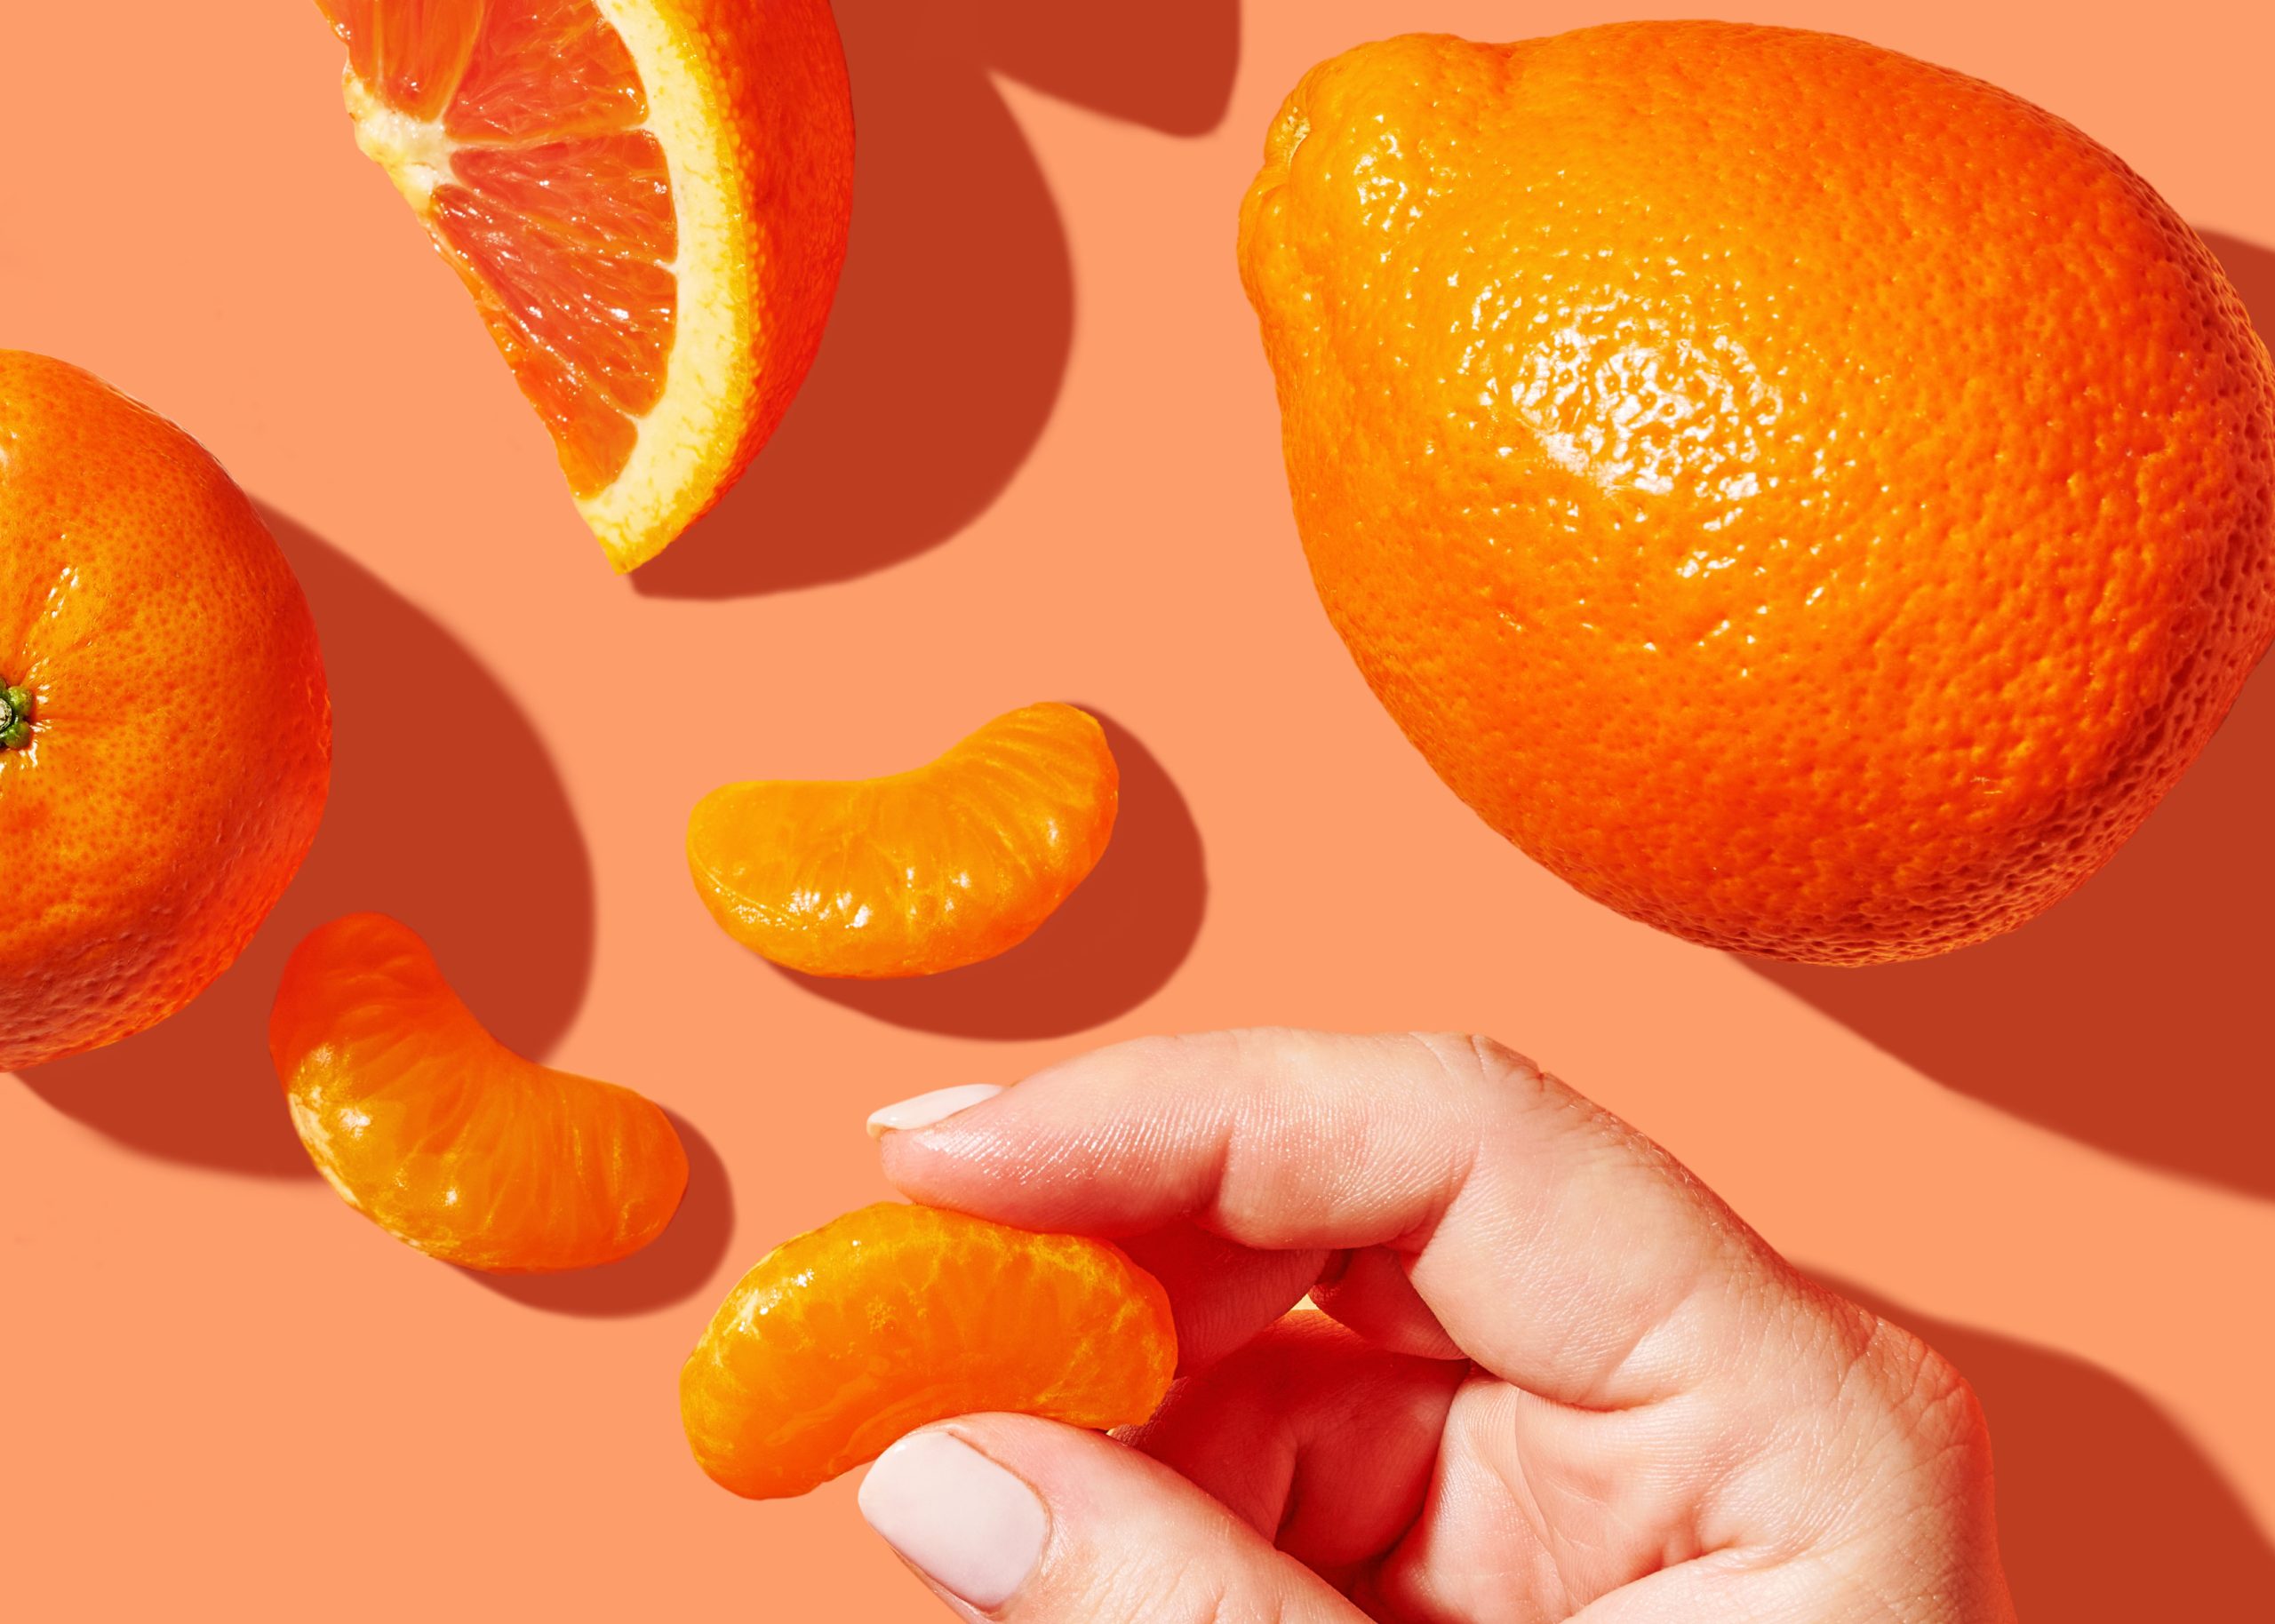 A photoshoot-style shot of citrus including grapefruit and clementines with a hand holding a slice